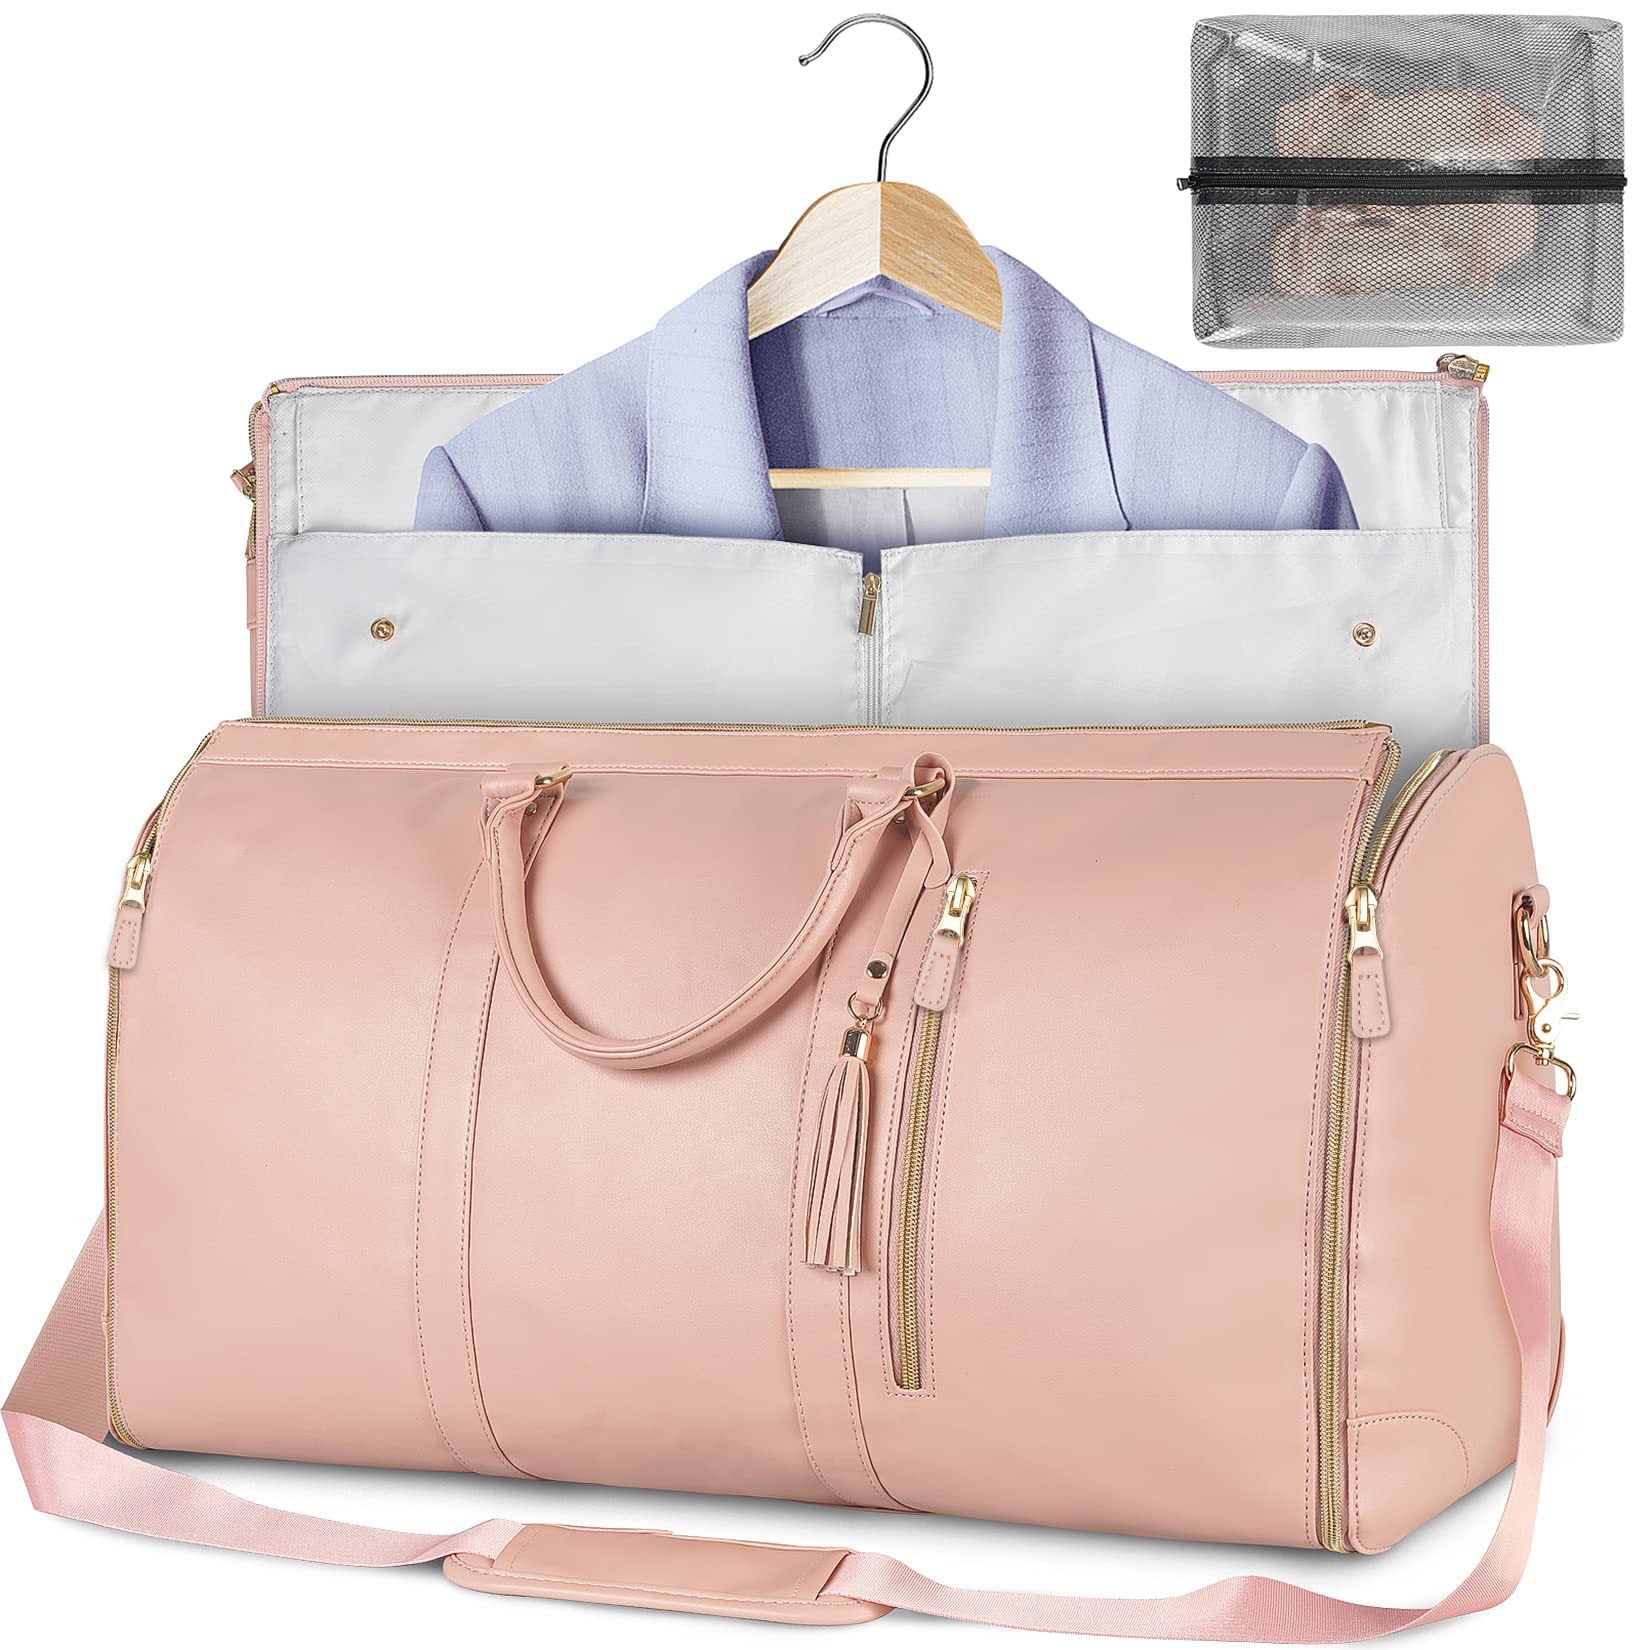 "Travel in Style: Large Capacity Carry On Garment Bag with PU Leather Duffle – Waterproof and Chic, Complete with Shoe Pouch! The Ultimate 2-in-1 Hanging Suitcase Suit Travel Bags, Ideal Gifts for Women." lioness-love